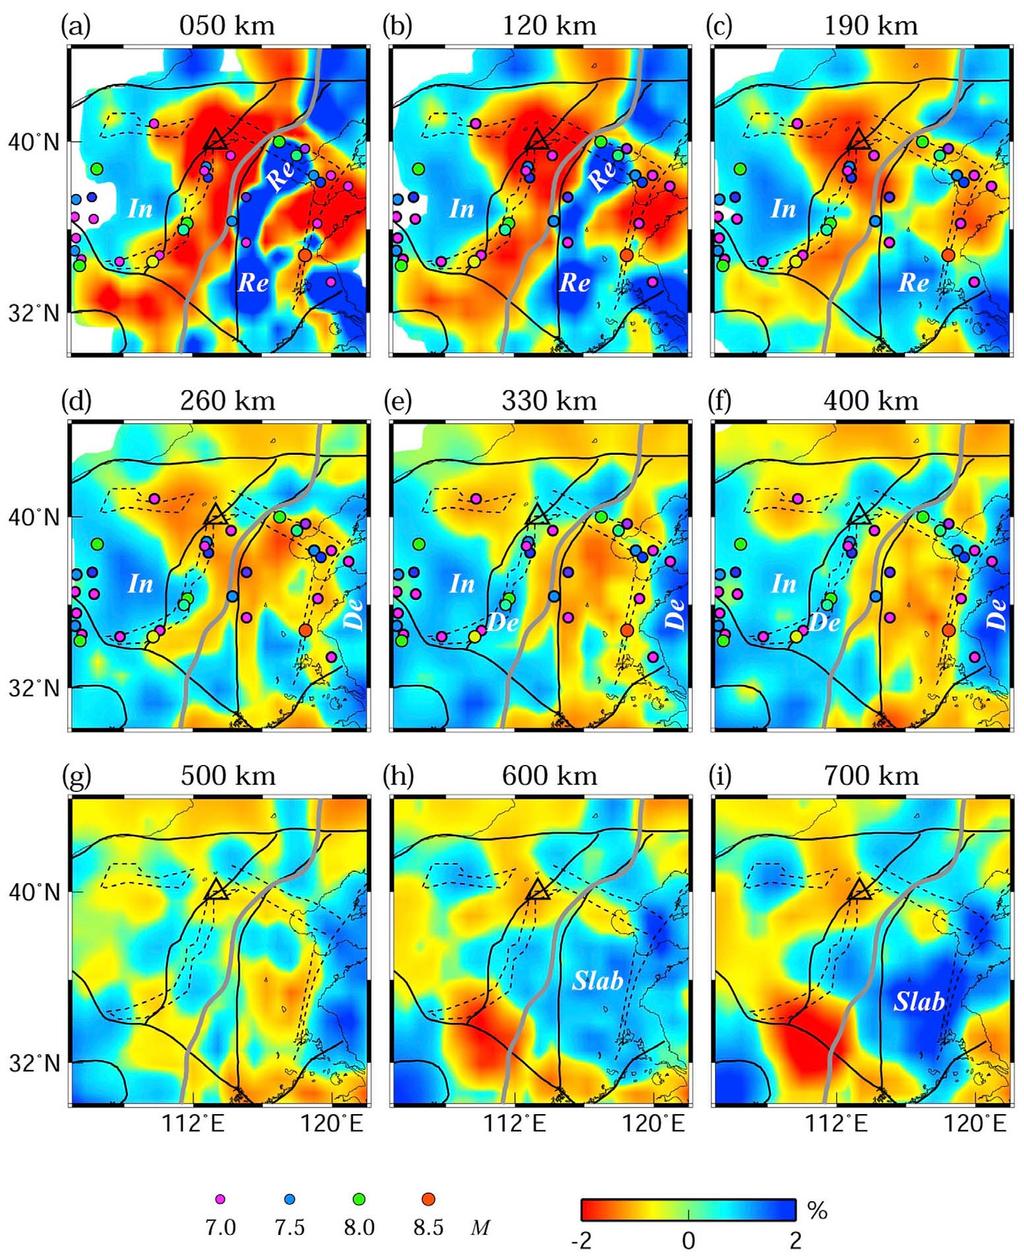 Figure 13. The resulting tomographic images in map view. Red and blue colors denote low-v and high- V anomalies, respectively. The scale for velocity perturbation (in %) is shown at the bottom.